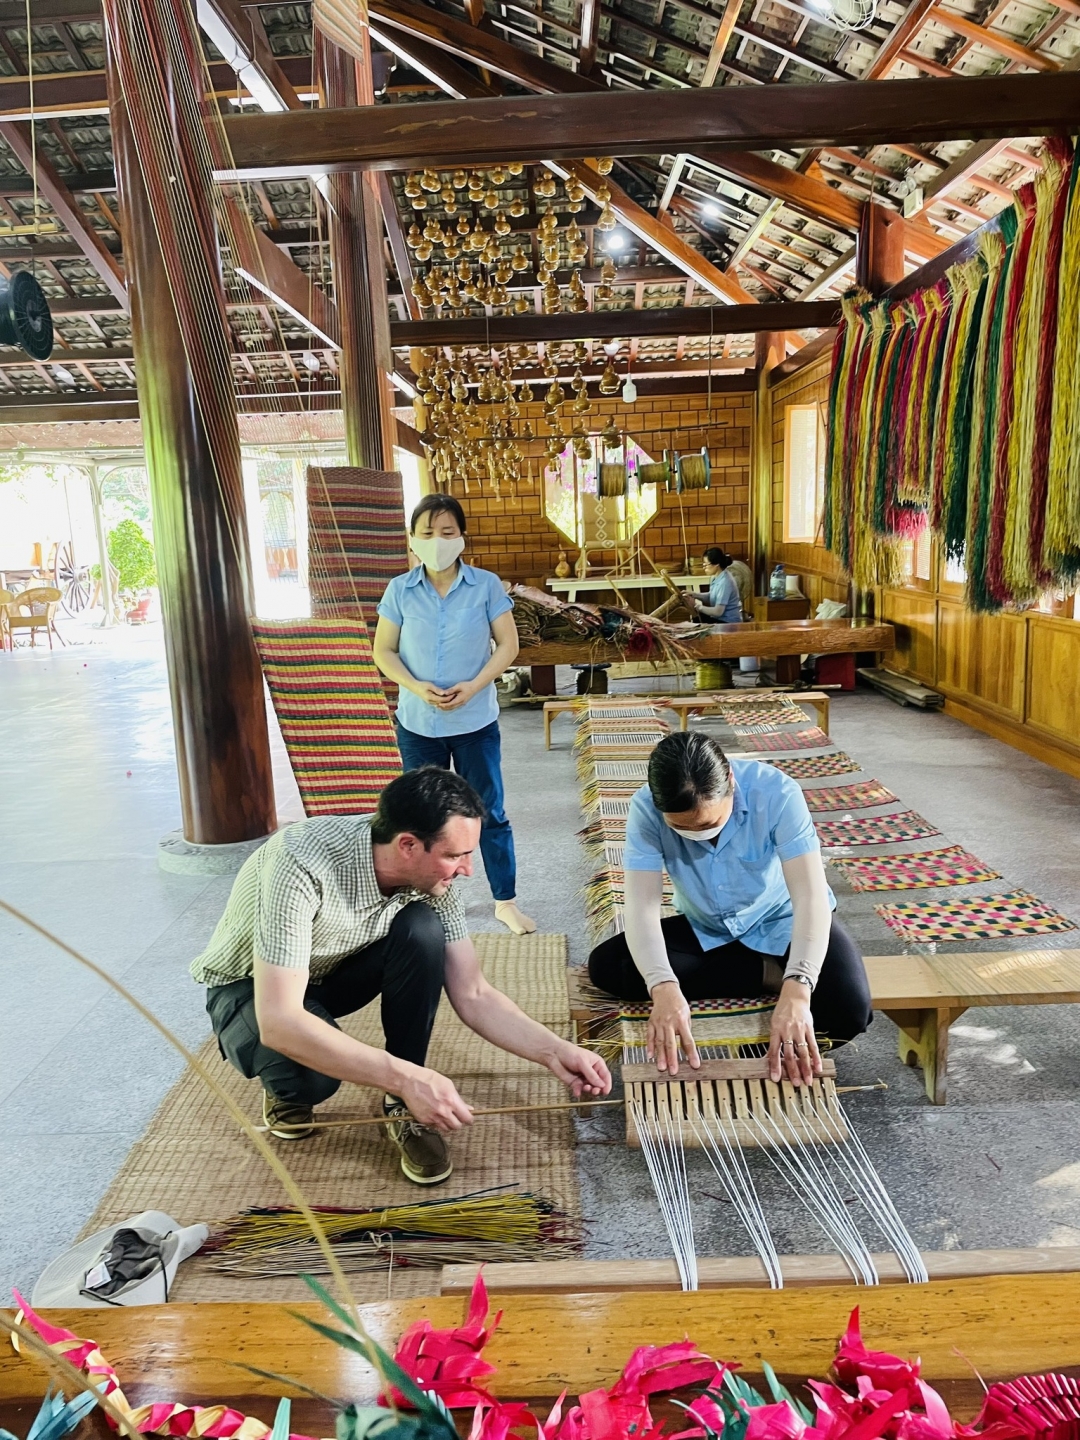 International visitors learn about traditional sedge mat weaving techniques.
